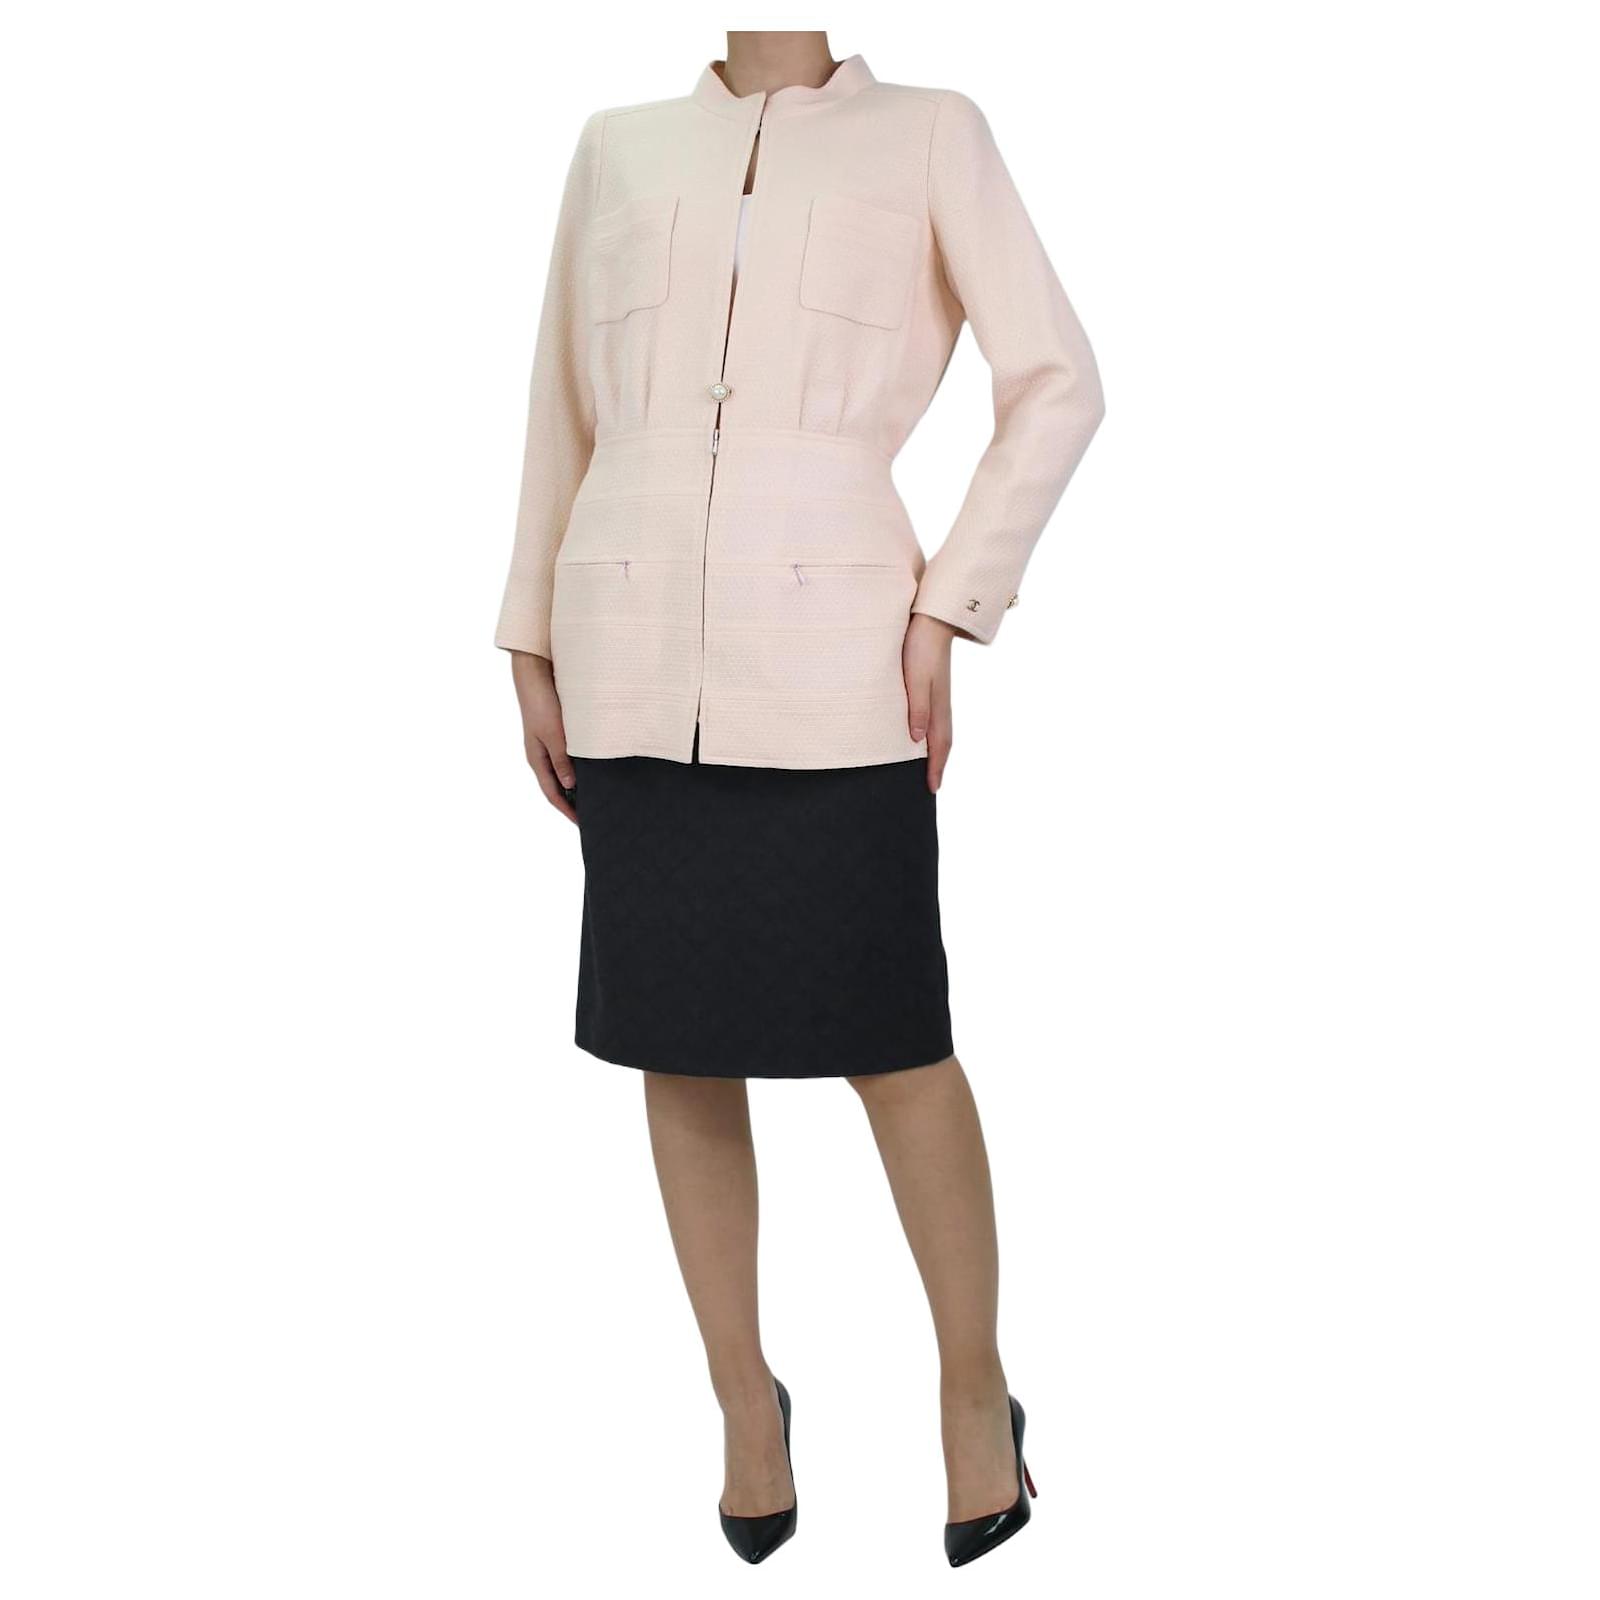 Pre Owned Chanel Pink Lesage Tweed Jacket FR40 Fits FR38 Gals more 2004  Spring - Mrs Vintage - Selling Vintage Wedding Lace Dress / Gowns &  Accessories from 1920s – 1990s. And